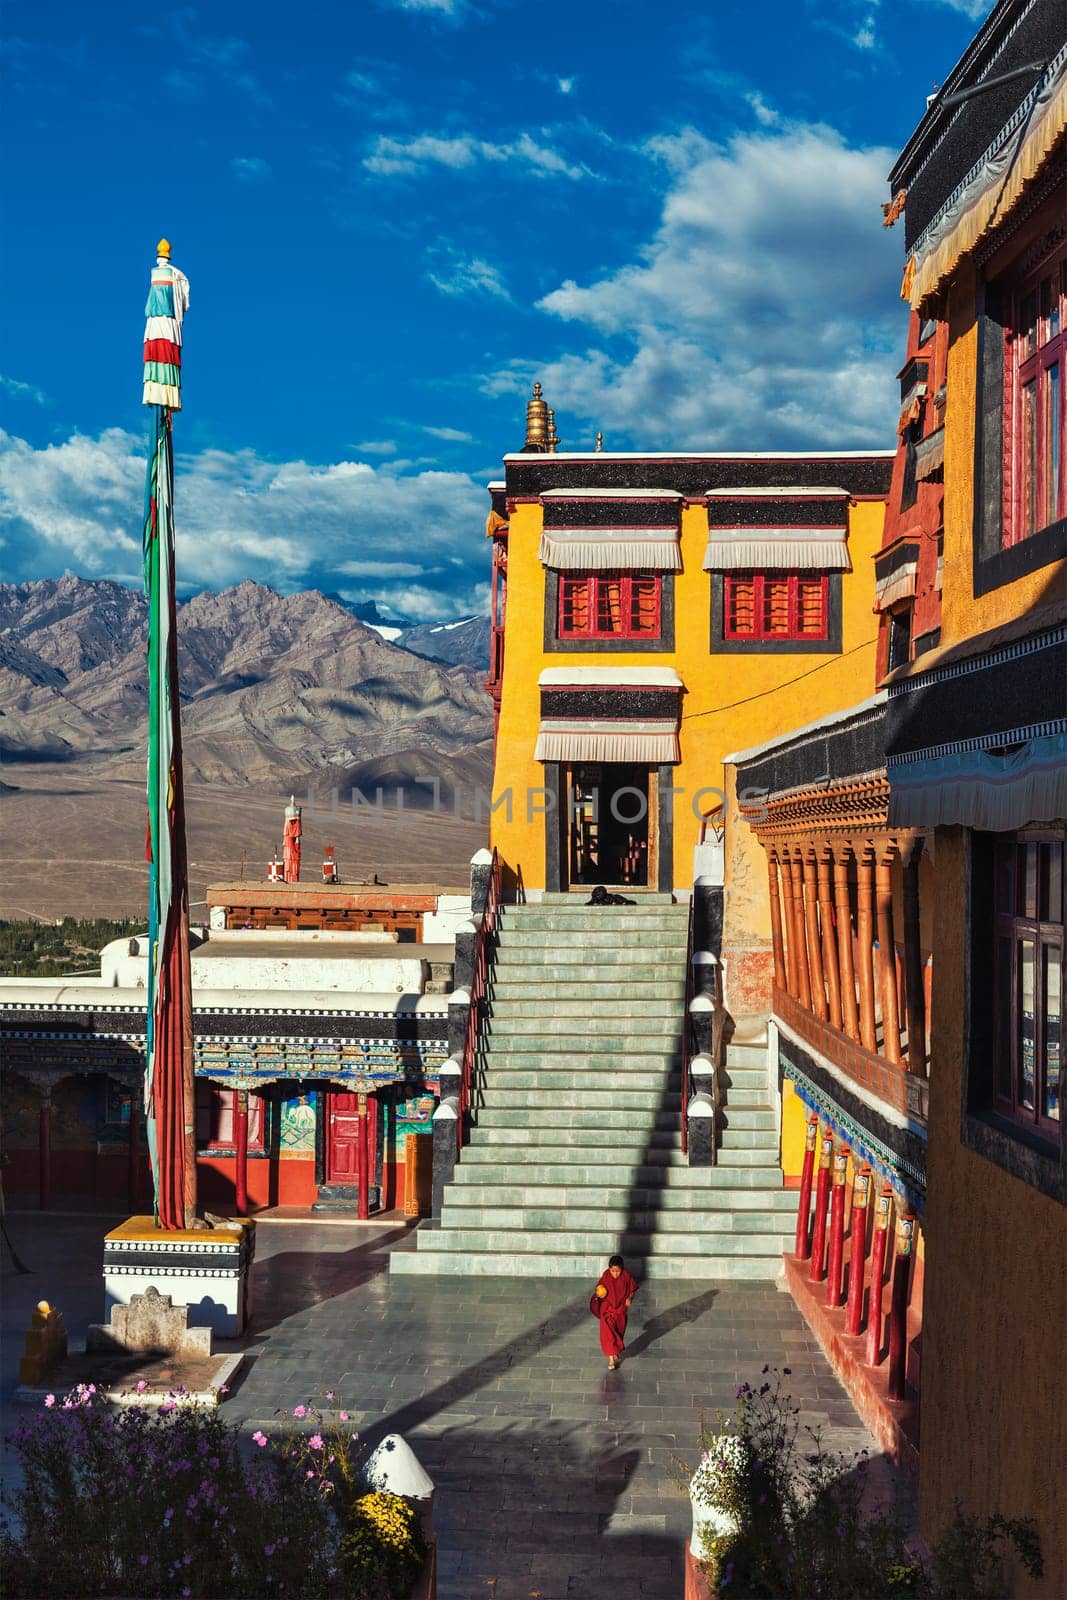 THIKSEY, INDIA - SEPTEMBER 13, 2012: Young Buddhist monk running in the courtyard of Thiksey gompa Buddhist monastery in Ladakh, India